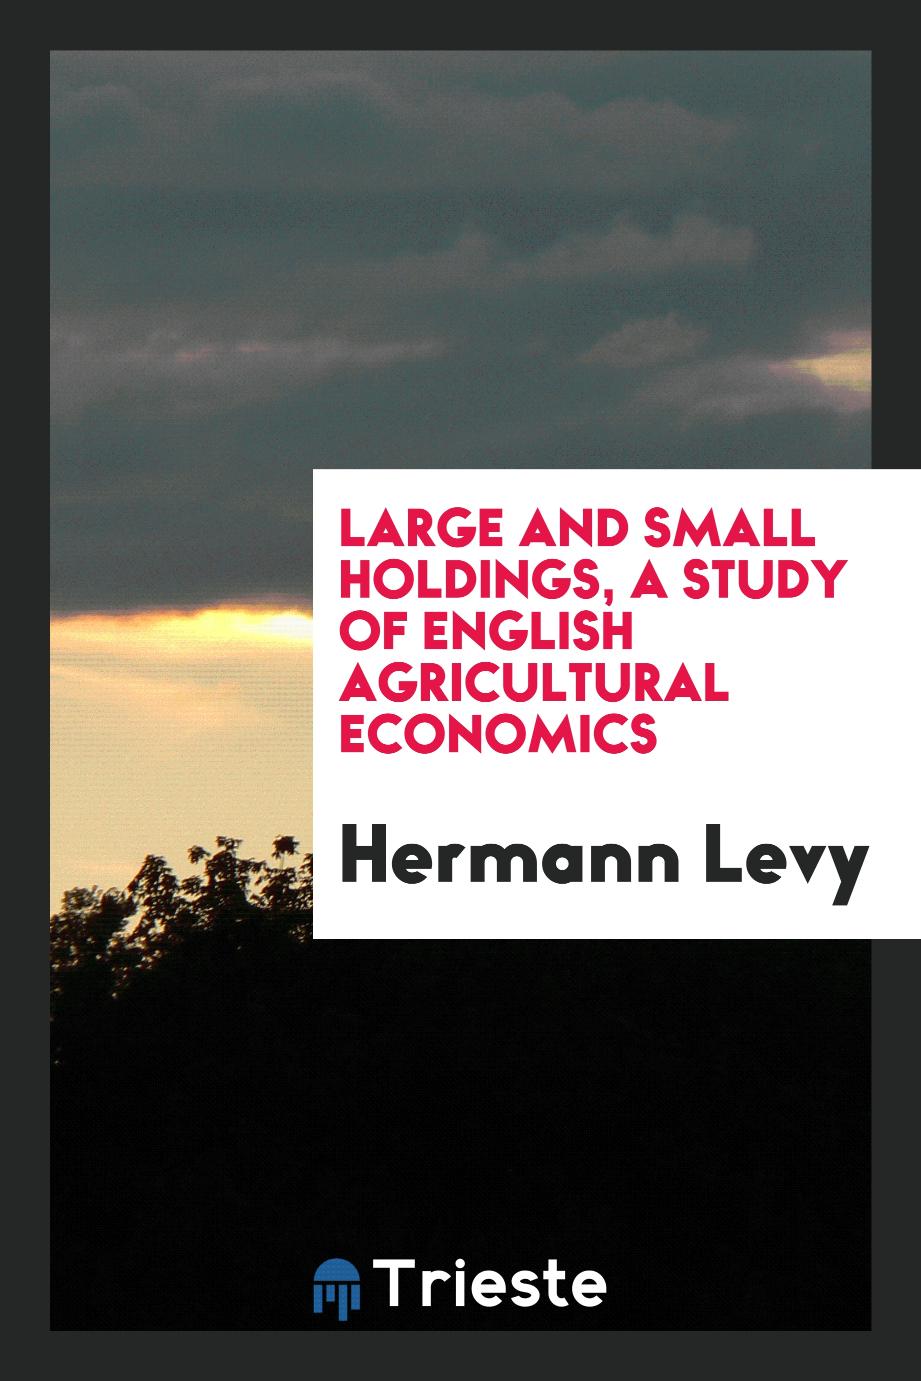 Large and small holdings, a study of English agricultural economics